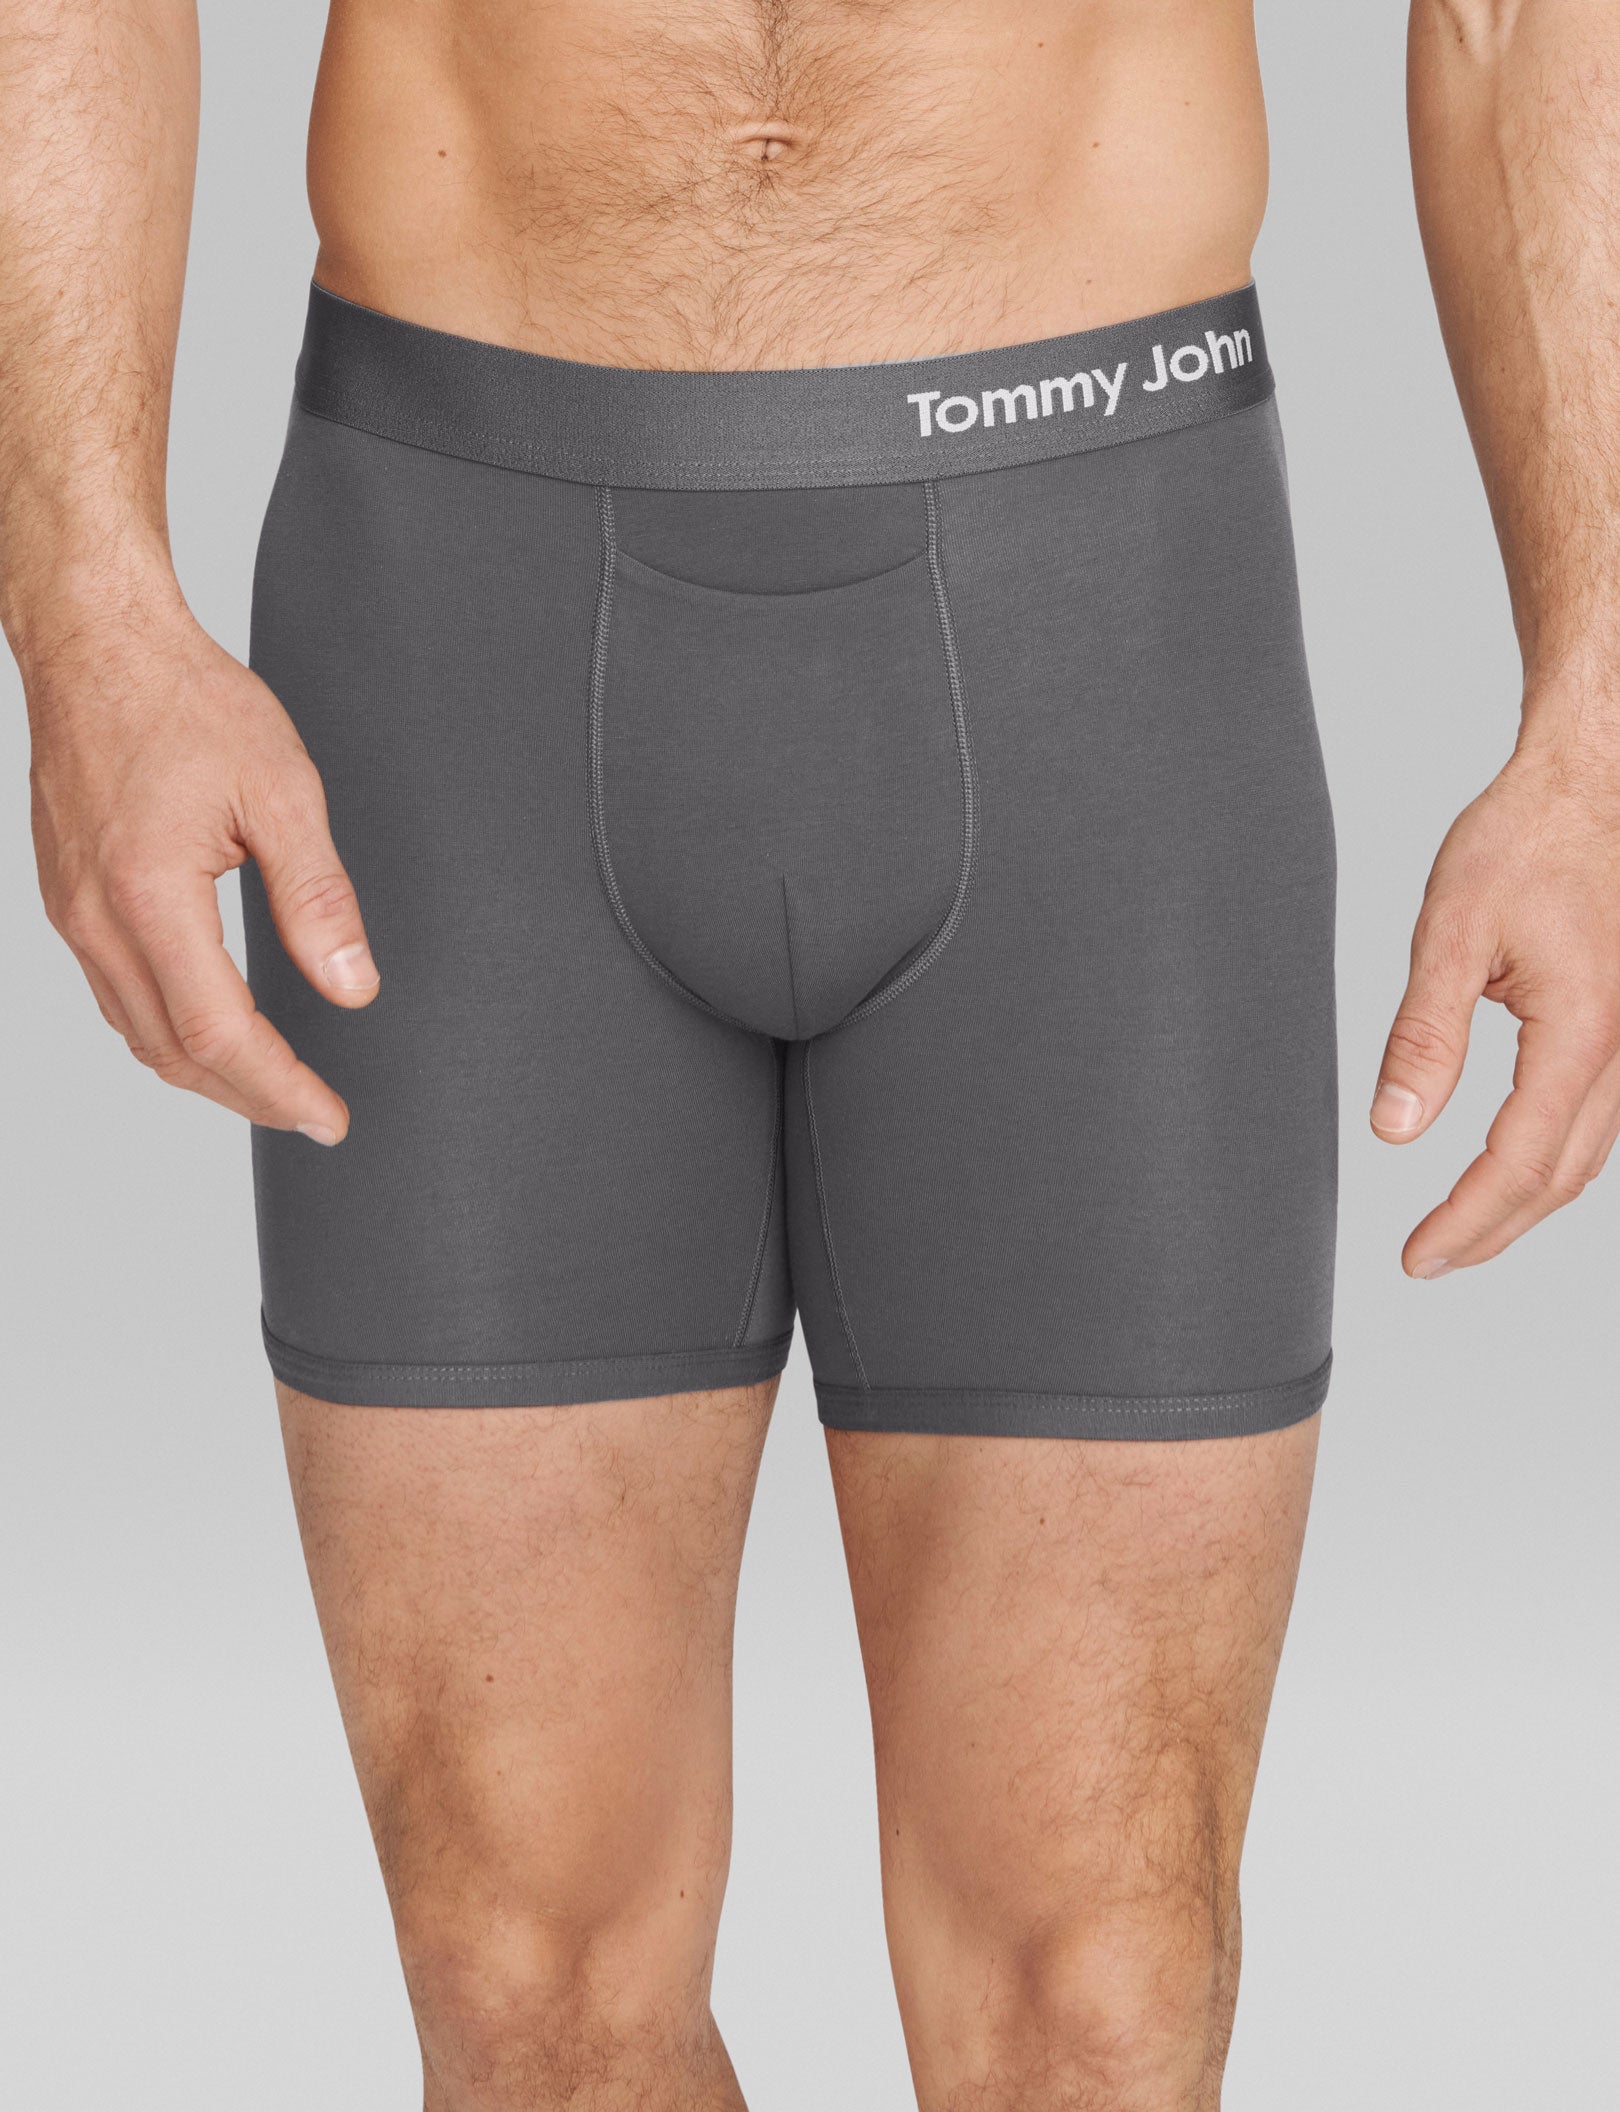 Tommy John Cool Cotton Mid Length 6 In. Boxer Briefs, Underwear, Clothing  & Accessories